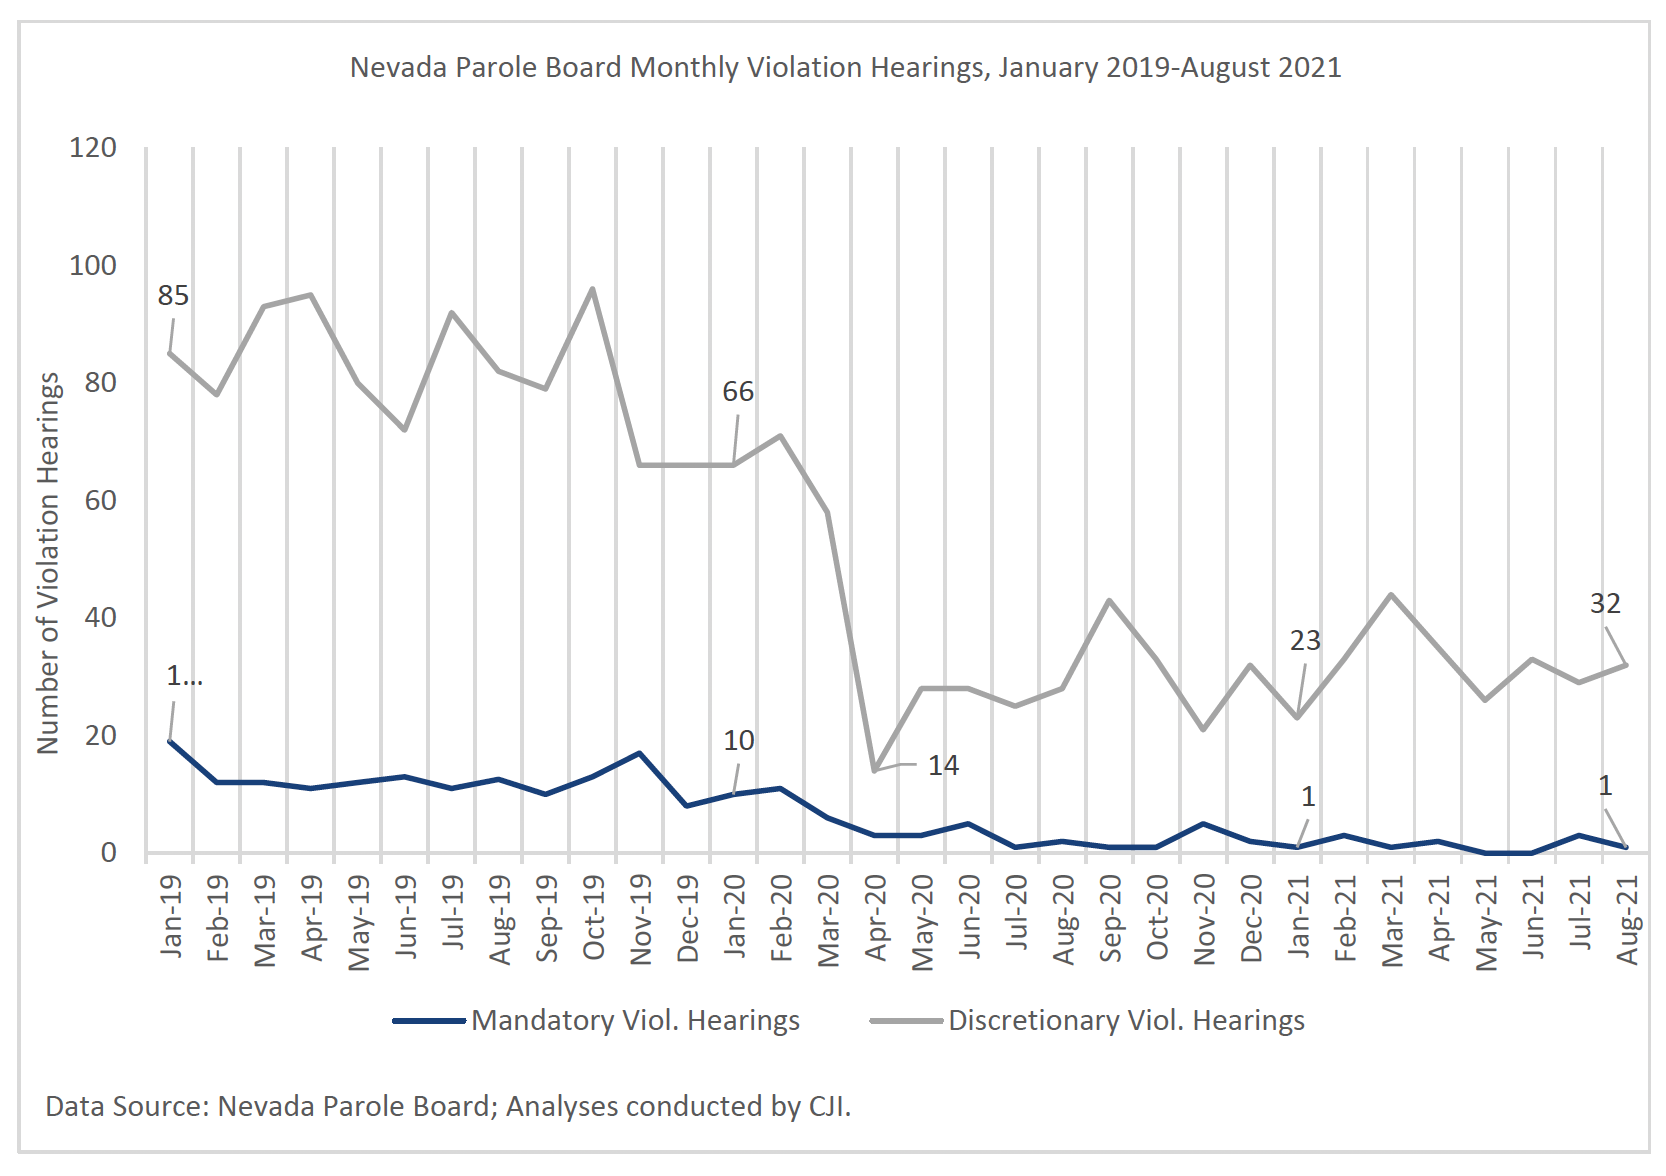 View of parole violation hearings remained low after April 2020 